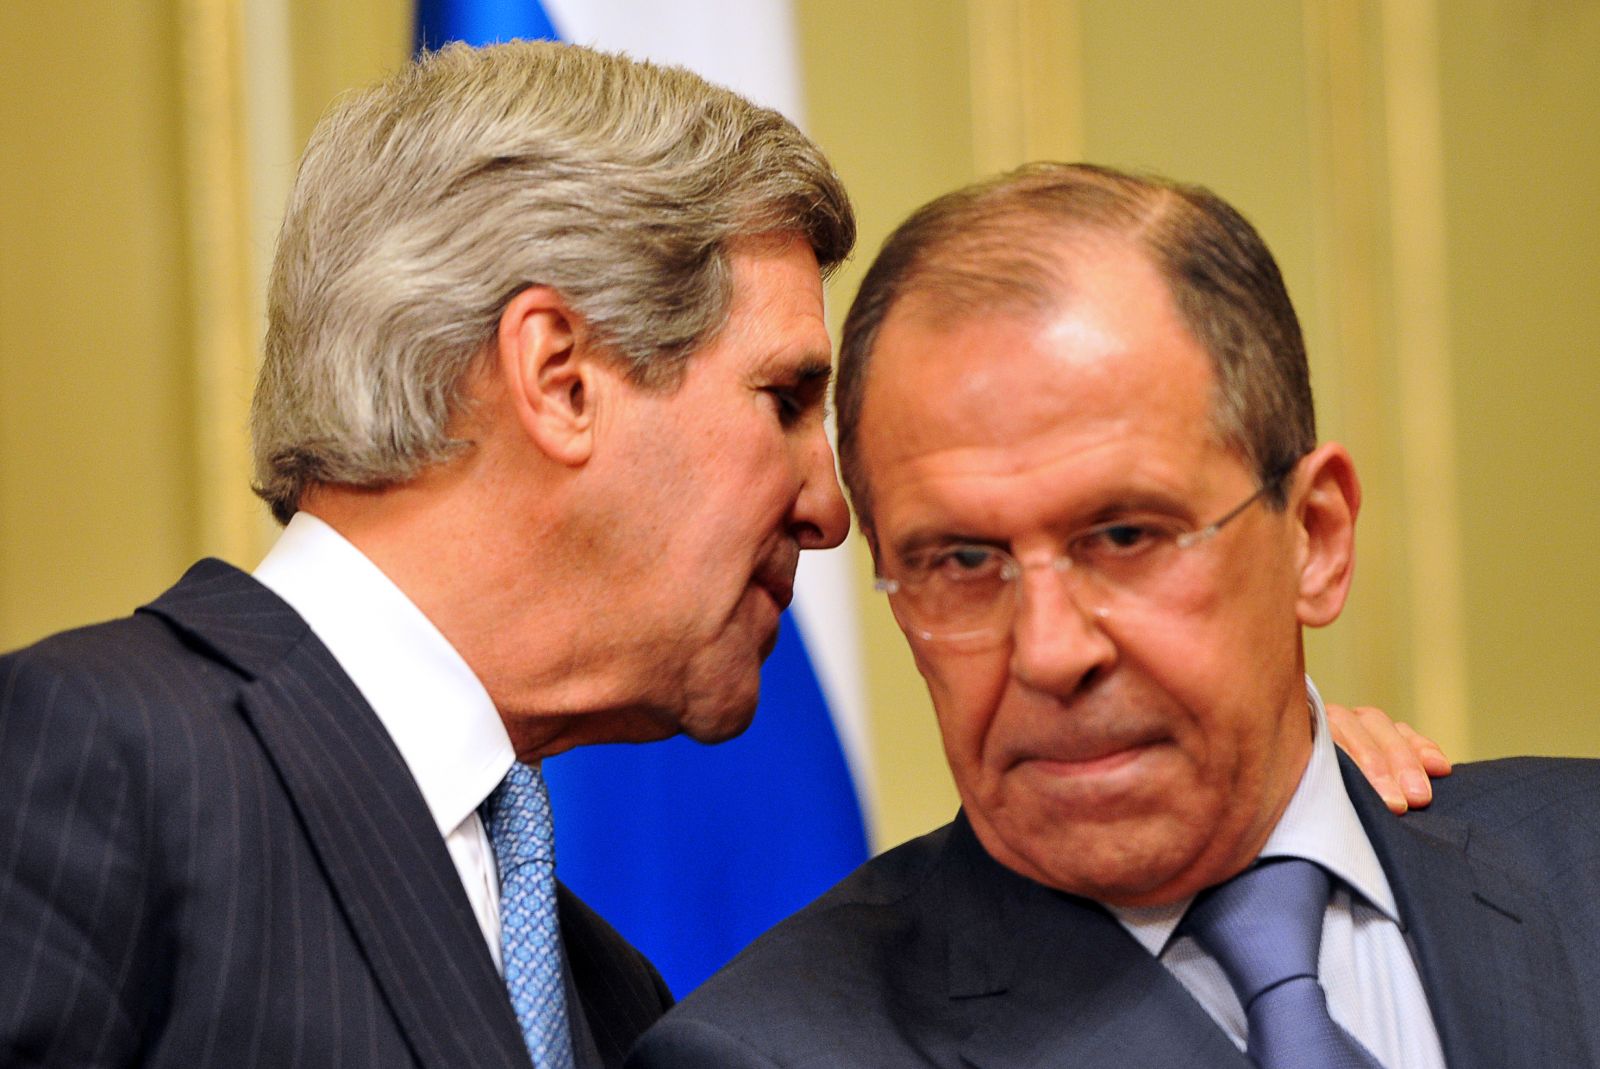 us-secretary-of-state-john-kerry-whispers-to-his-russian-counterpart-sergei-lavrov